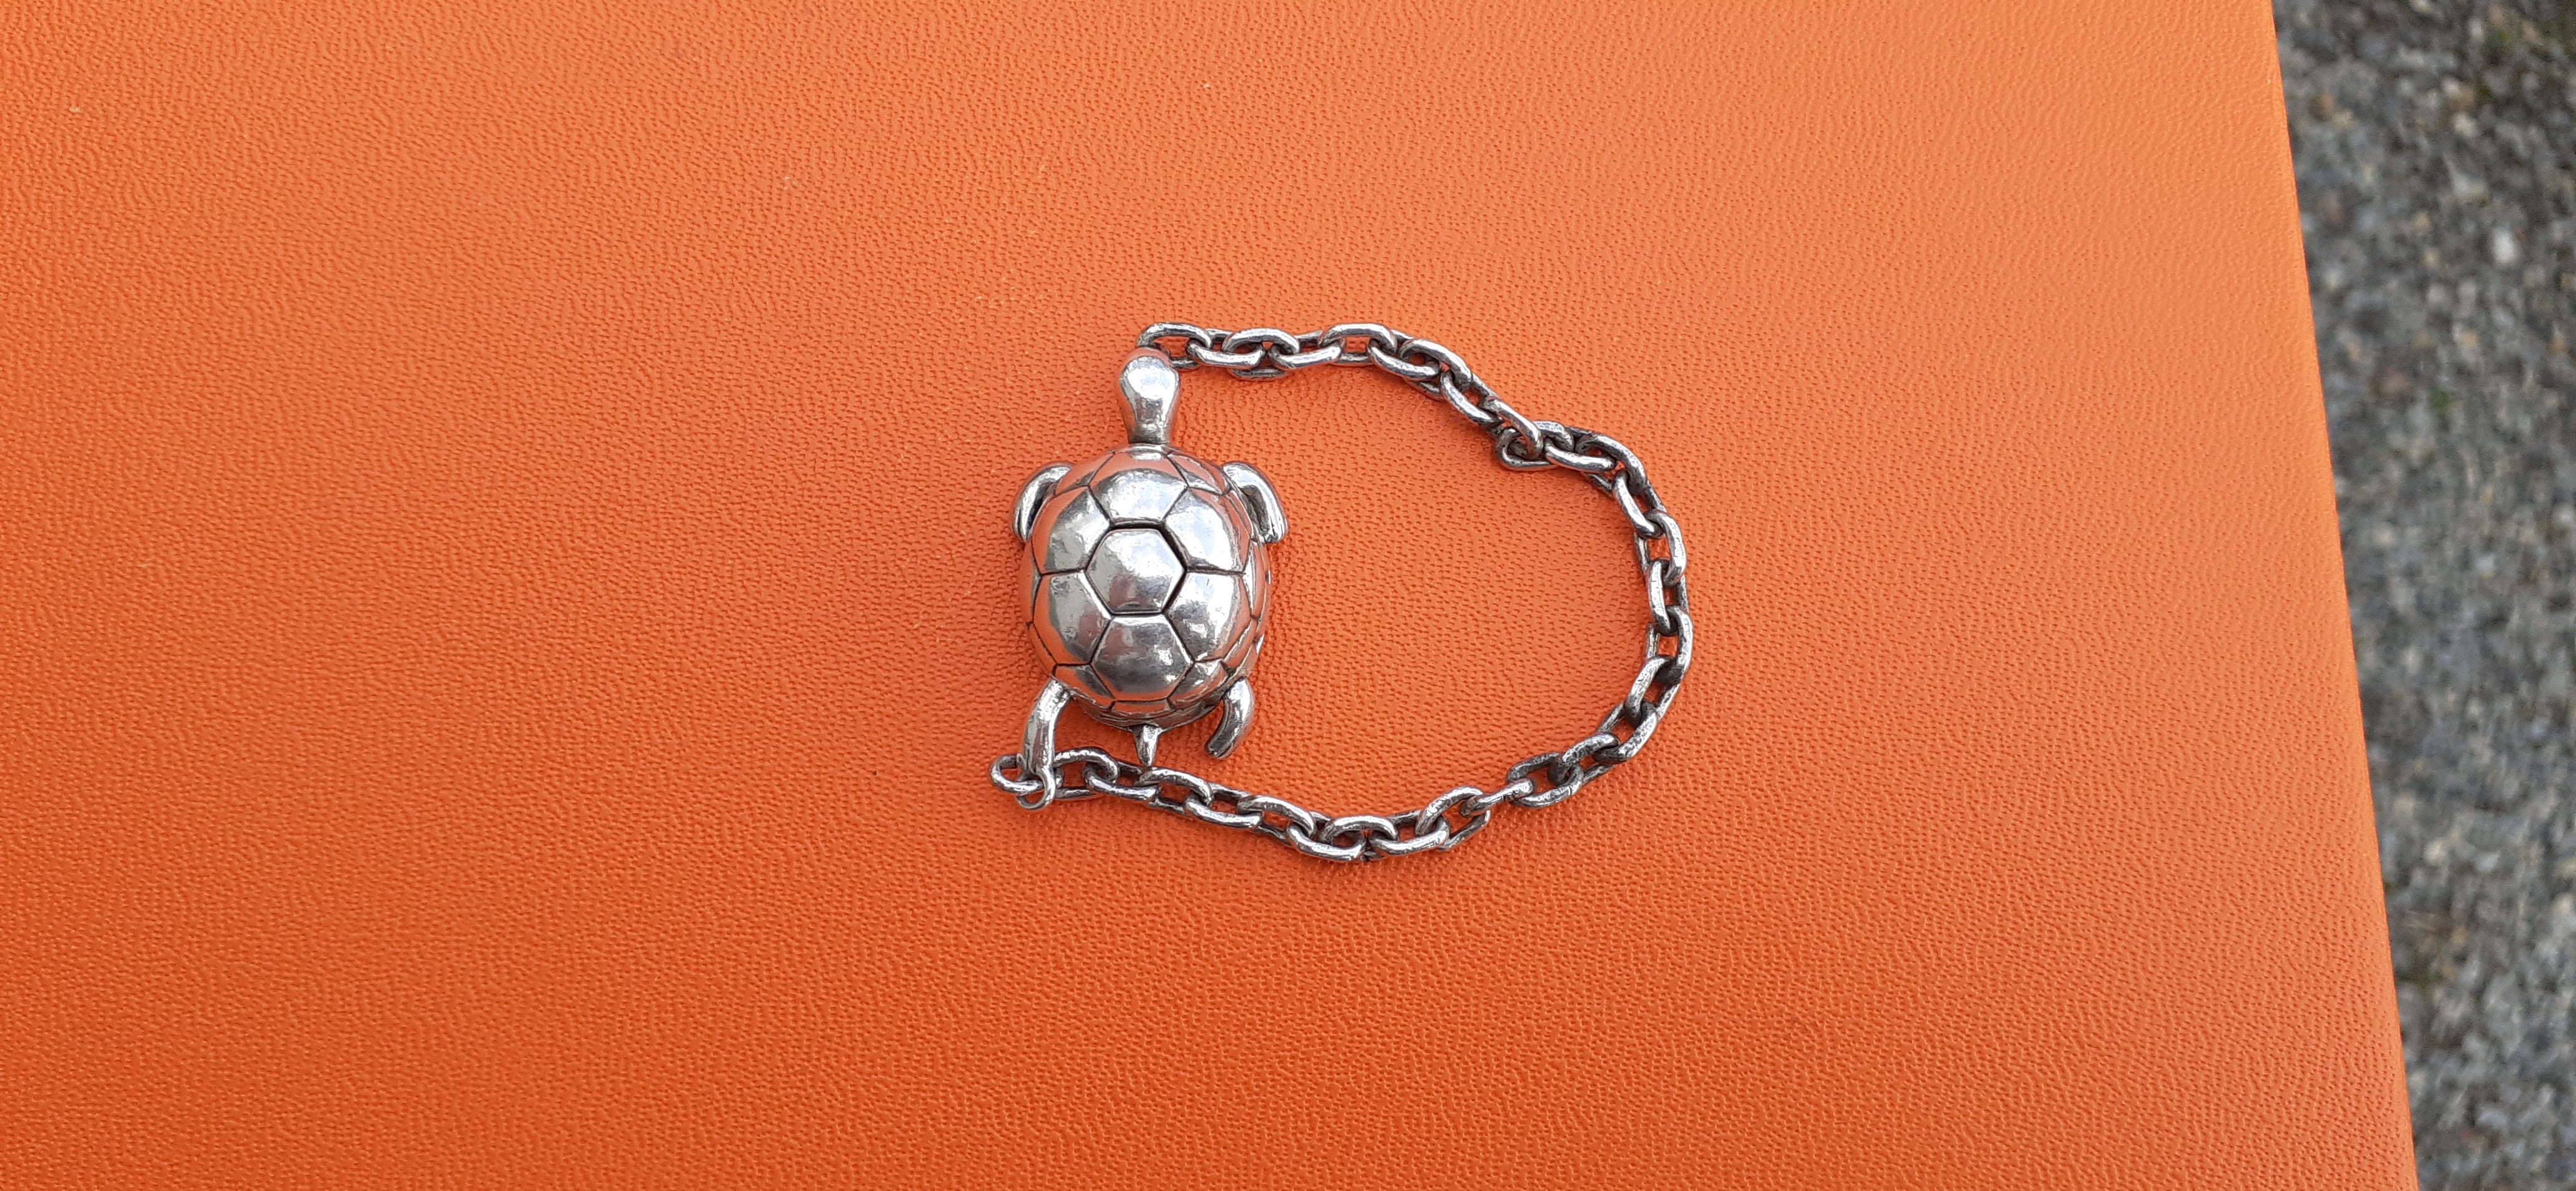 Rare Authentic Hermès Charm or Key Ring

Turtle Shaped

Can be used as Bag Charm or Key Ring

Made of Silver

Vintage Item

Colorway: silvery

Secret mechanism: you have to press on the back of the turtle and pull on its left hind paw at the same